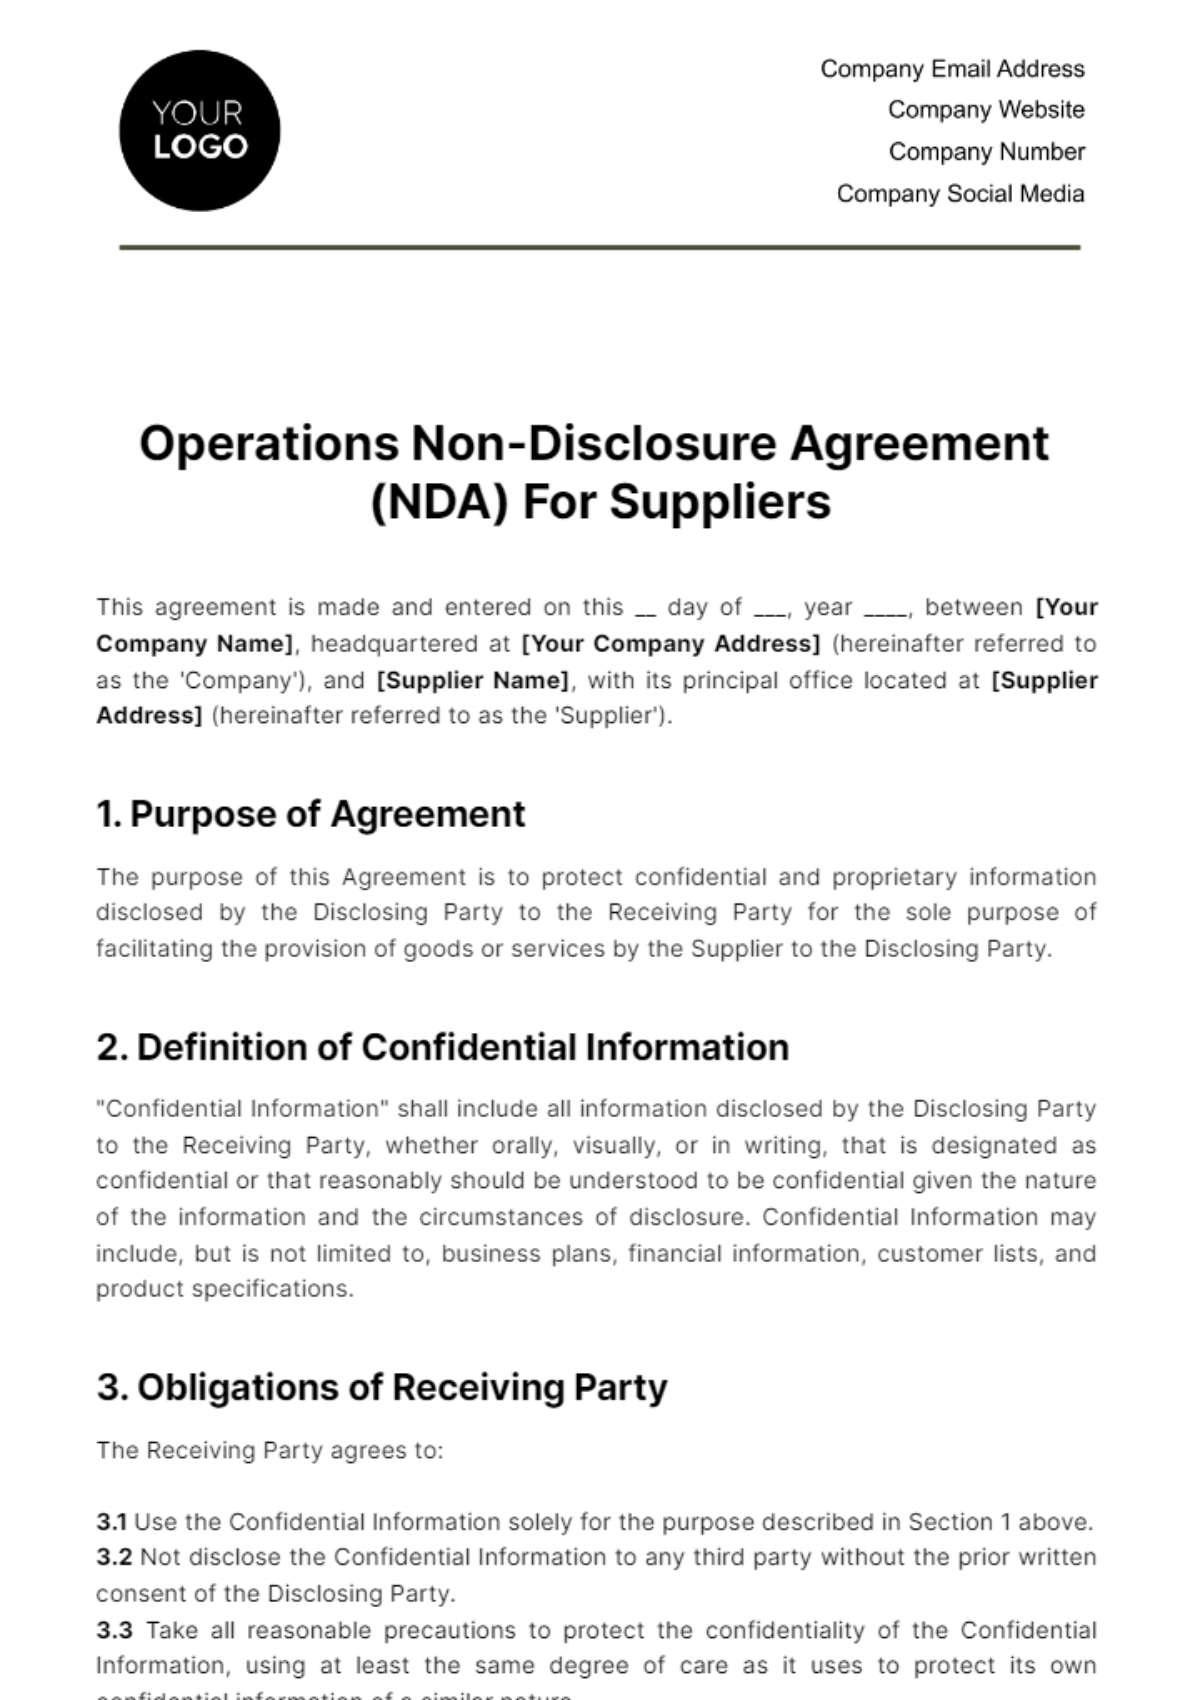 Free Operations Non-Disclosure Agreement (NDA) for Suppliers Template